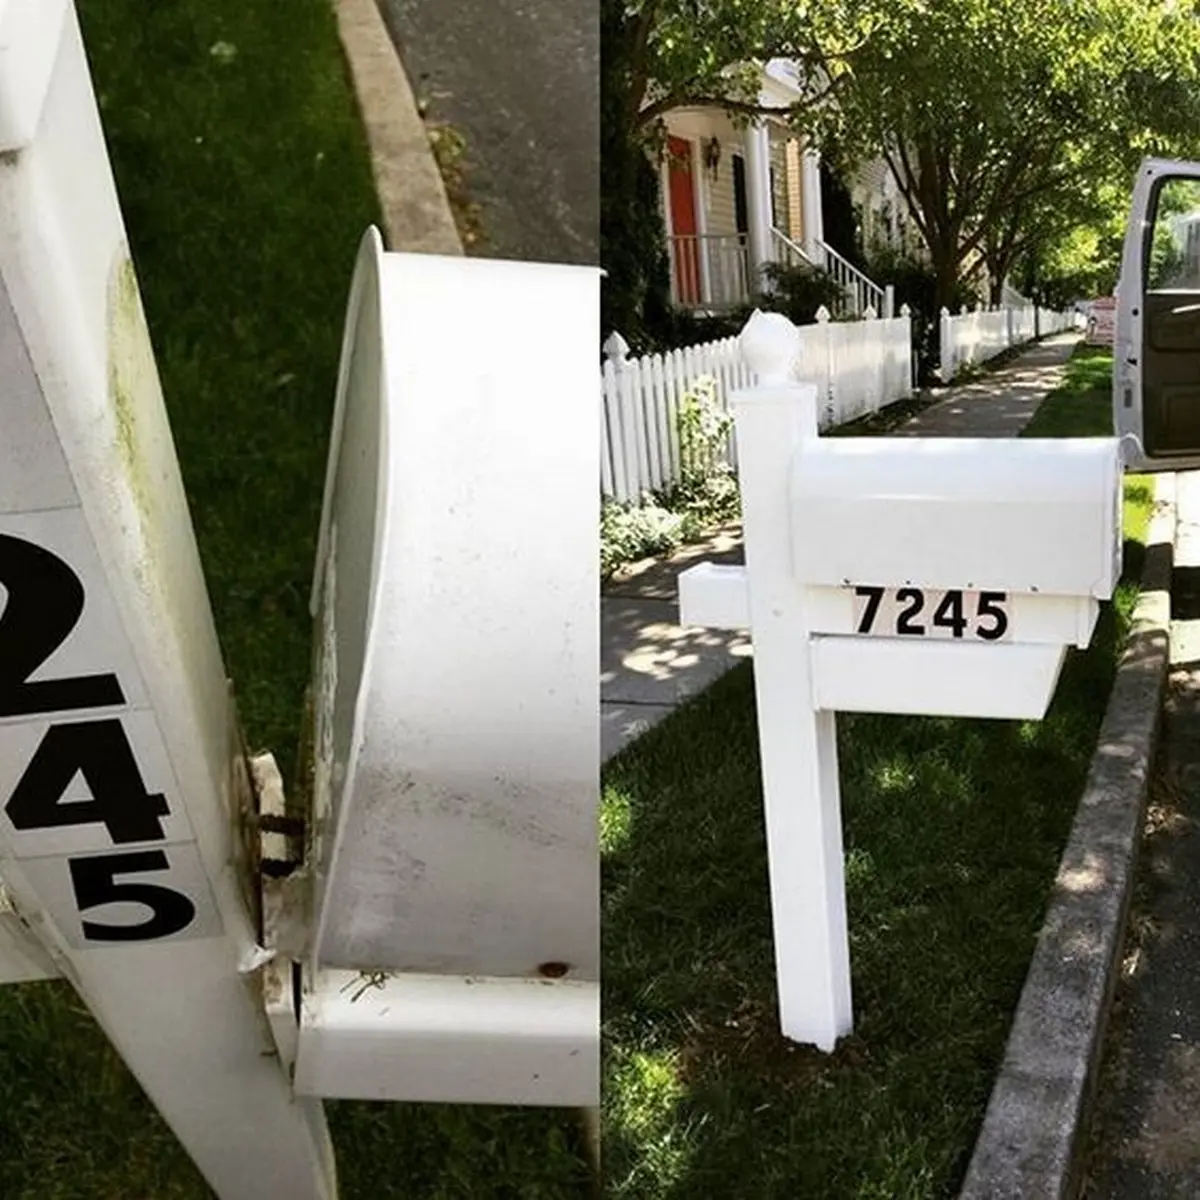 Before and after photos showcasing mailbox repair services by Mr. Handyman in Reading.